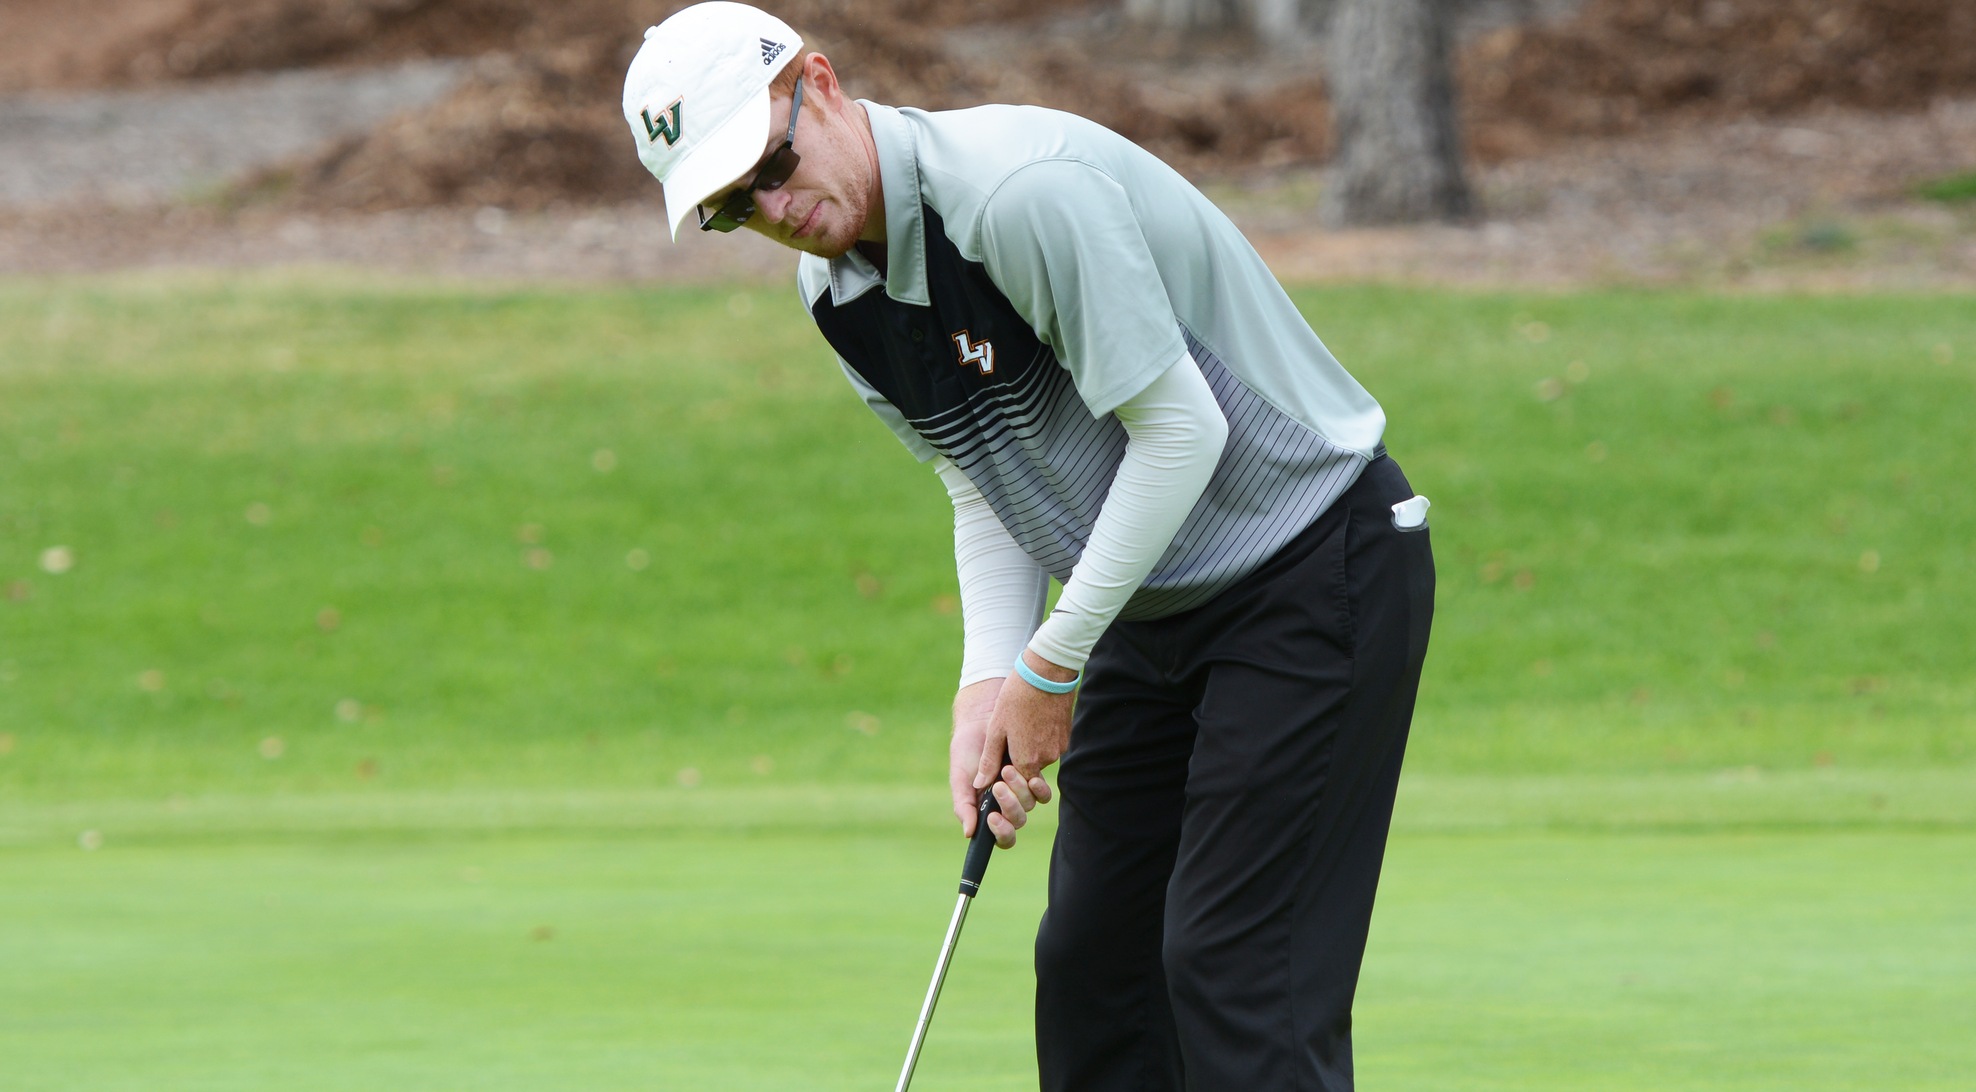 Spencer tied for 17th after first round of NCAA Championships